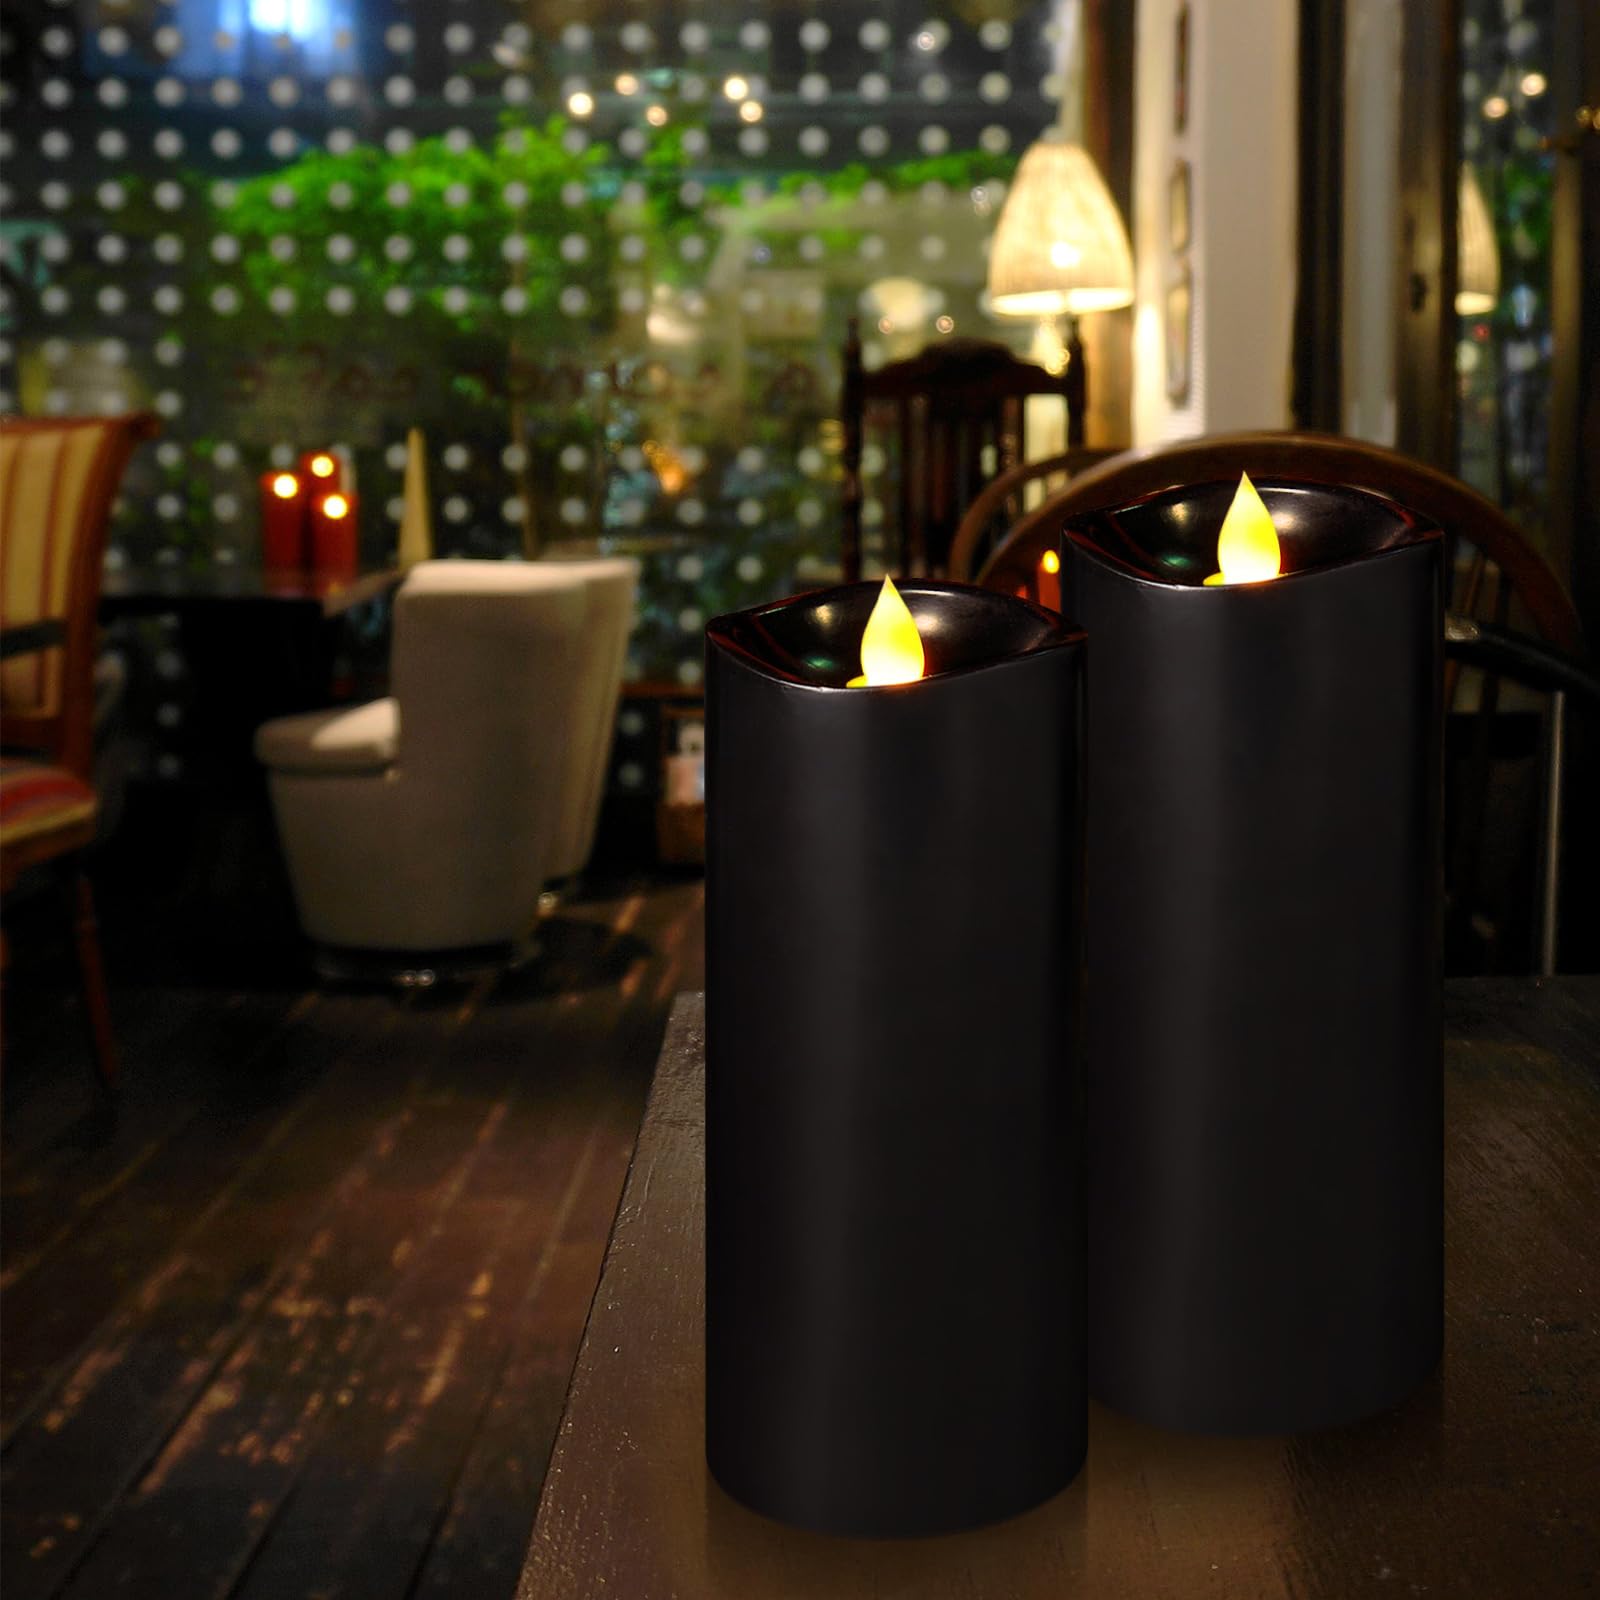 Enpornk 7” x 3” Flameless Candles, Flickering Moving Flame LED Candles, Battery Operated Candles with Remote and Timers, Black, Set of 2